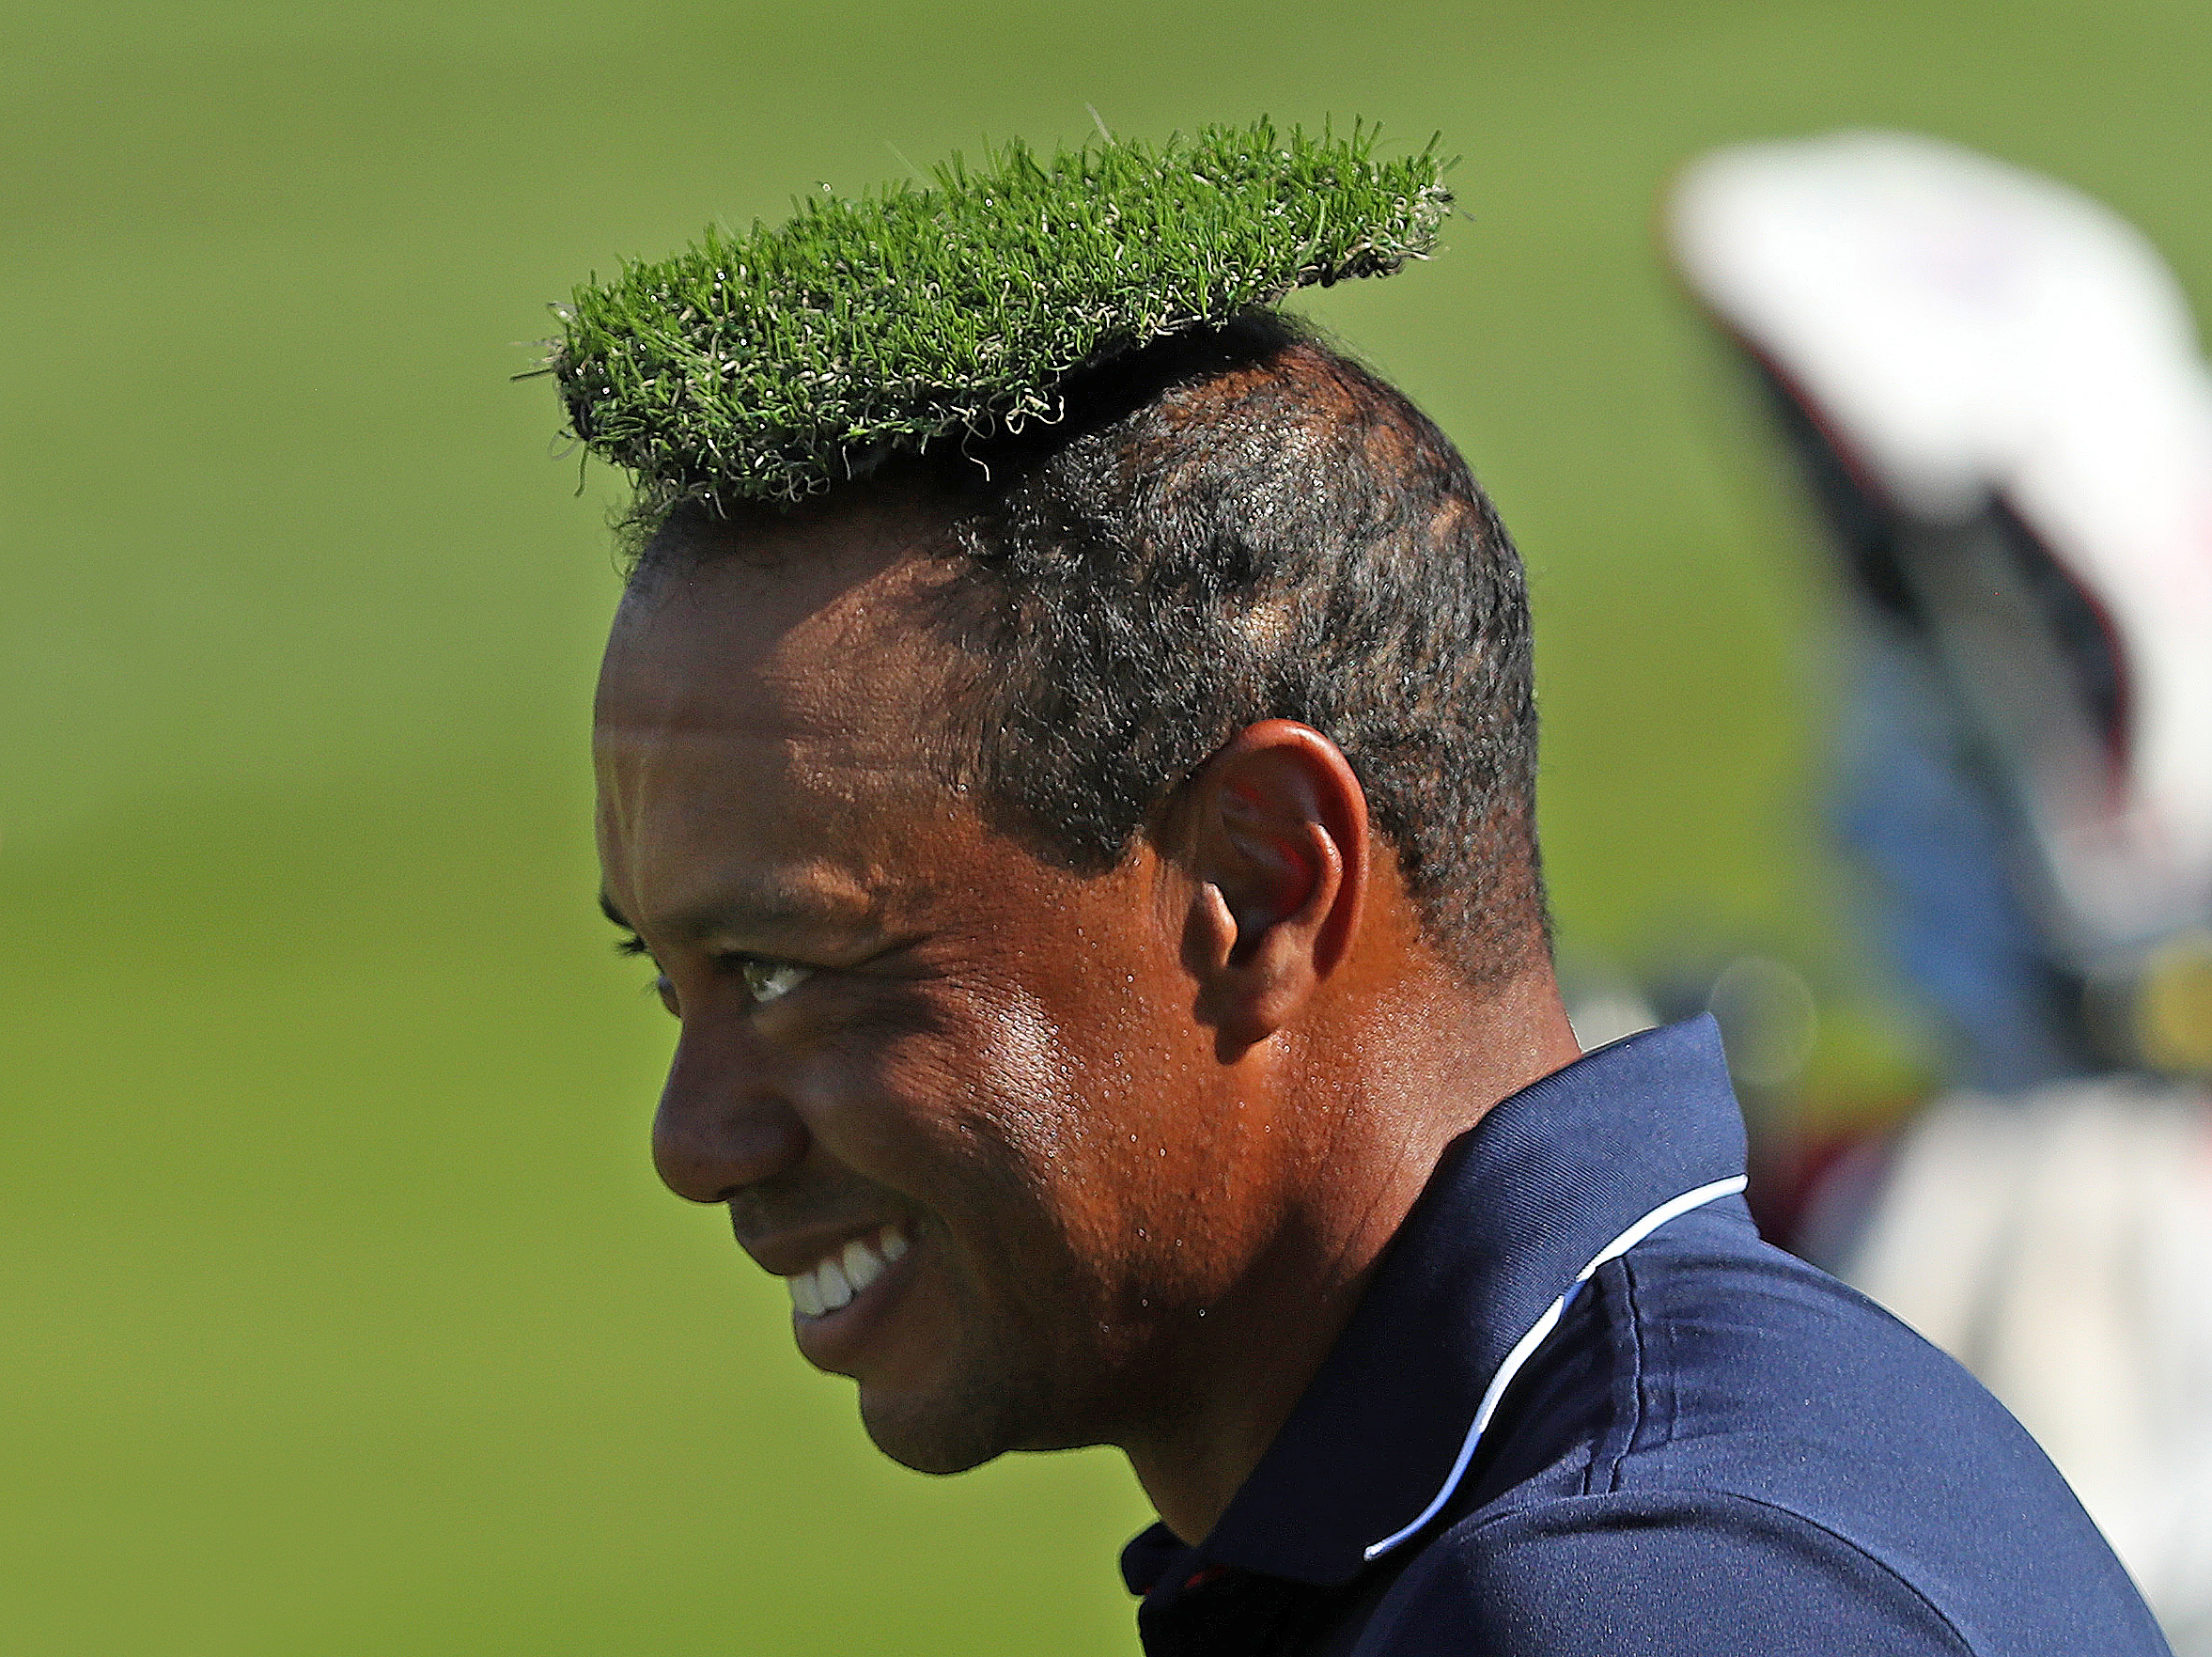  Tiger Woods has a piece of artificial grass placed on his head by Justin Thomas during a practice round for the Ryder Cup at Le Golf National, Paris.
Photo by Marc Aspland, 27 September 2018
 